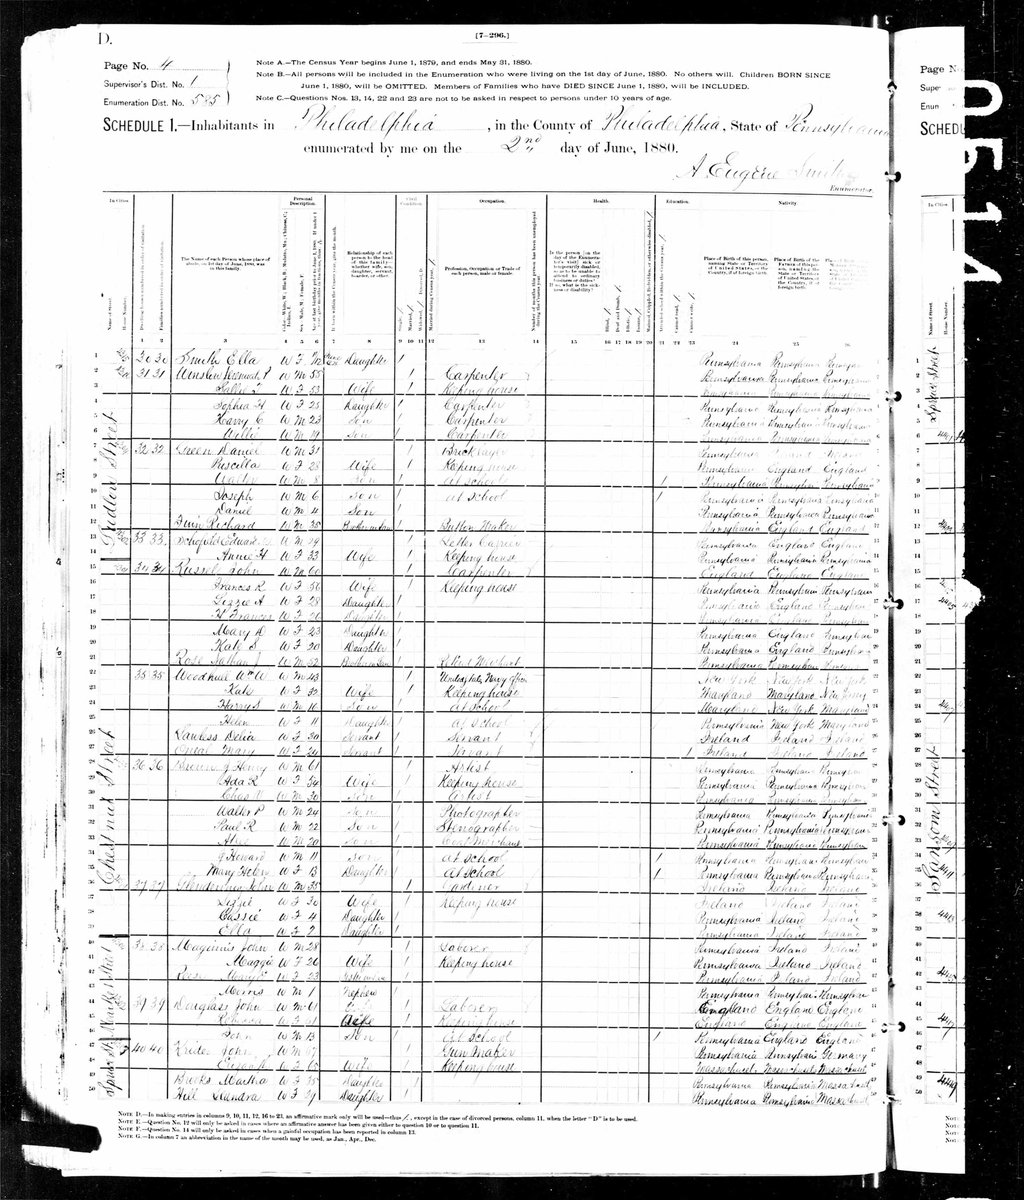 By the 1880 census, neither Laura Tucker nor Sallie DeCoursey was living in the Brown household. Tucker would have been 24 by then; we can imagine her making a life on her own.